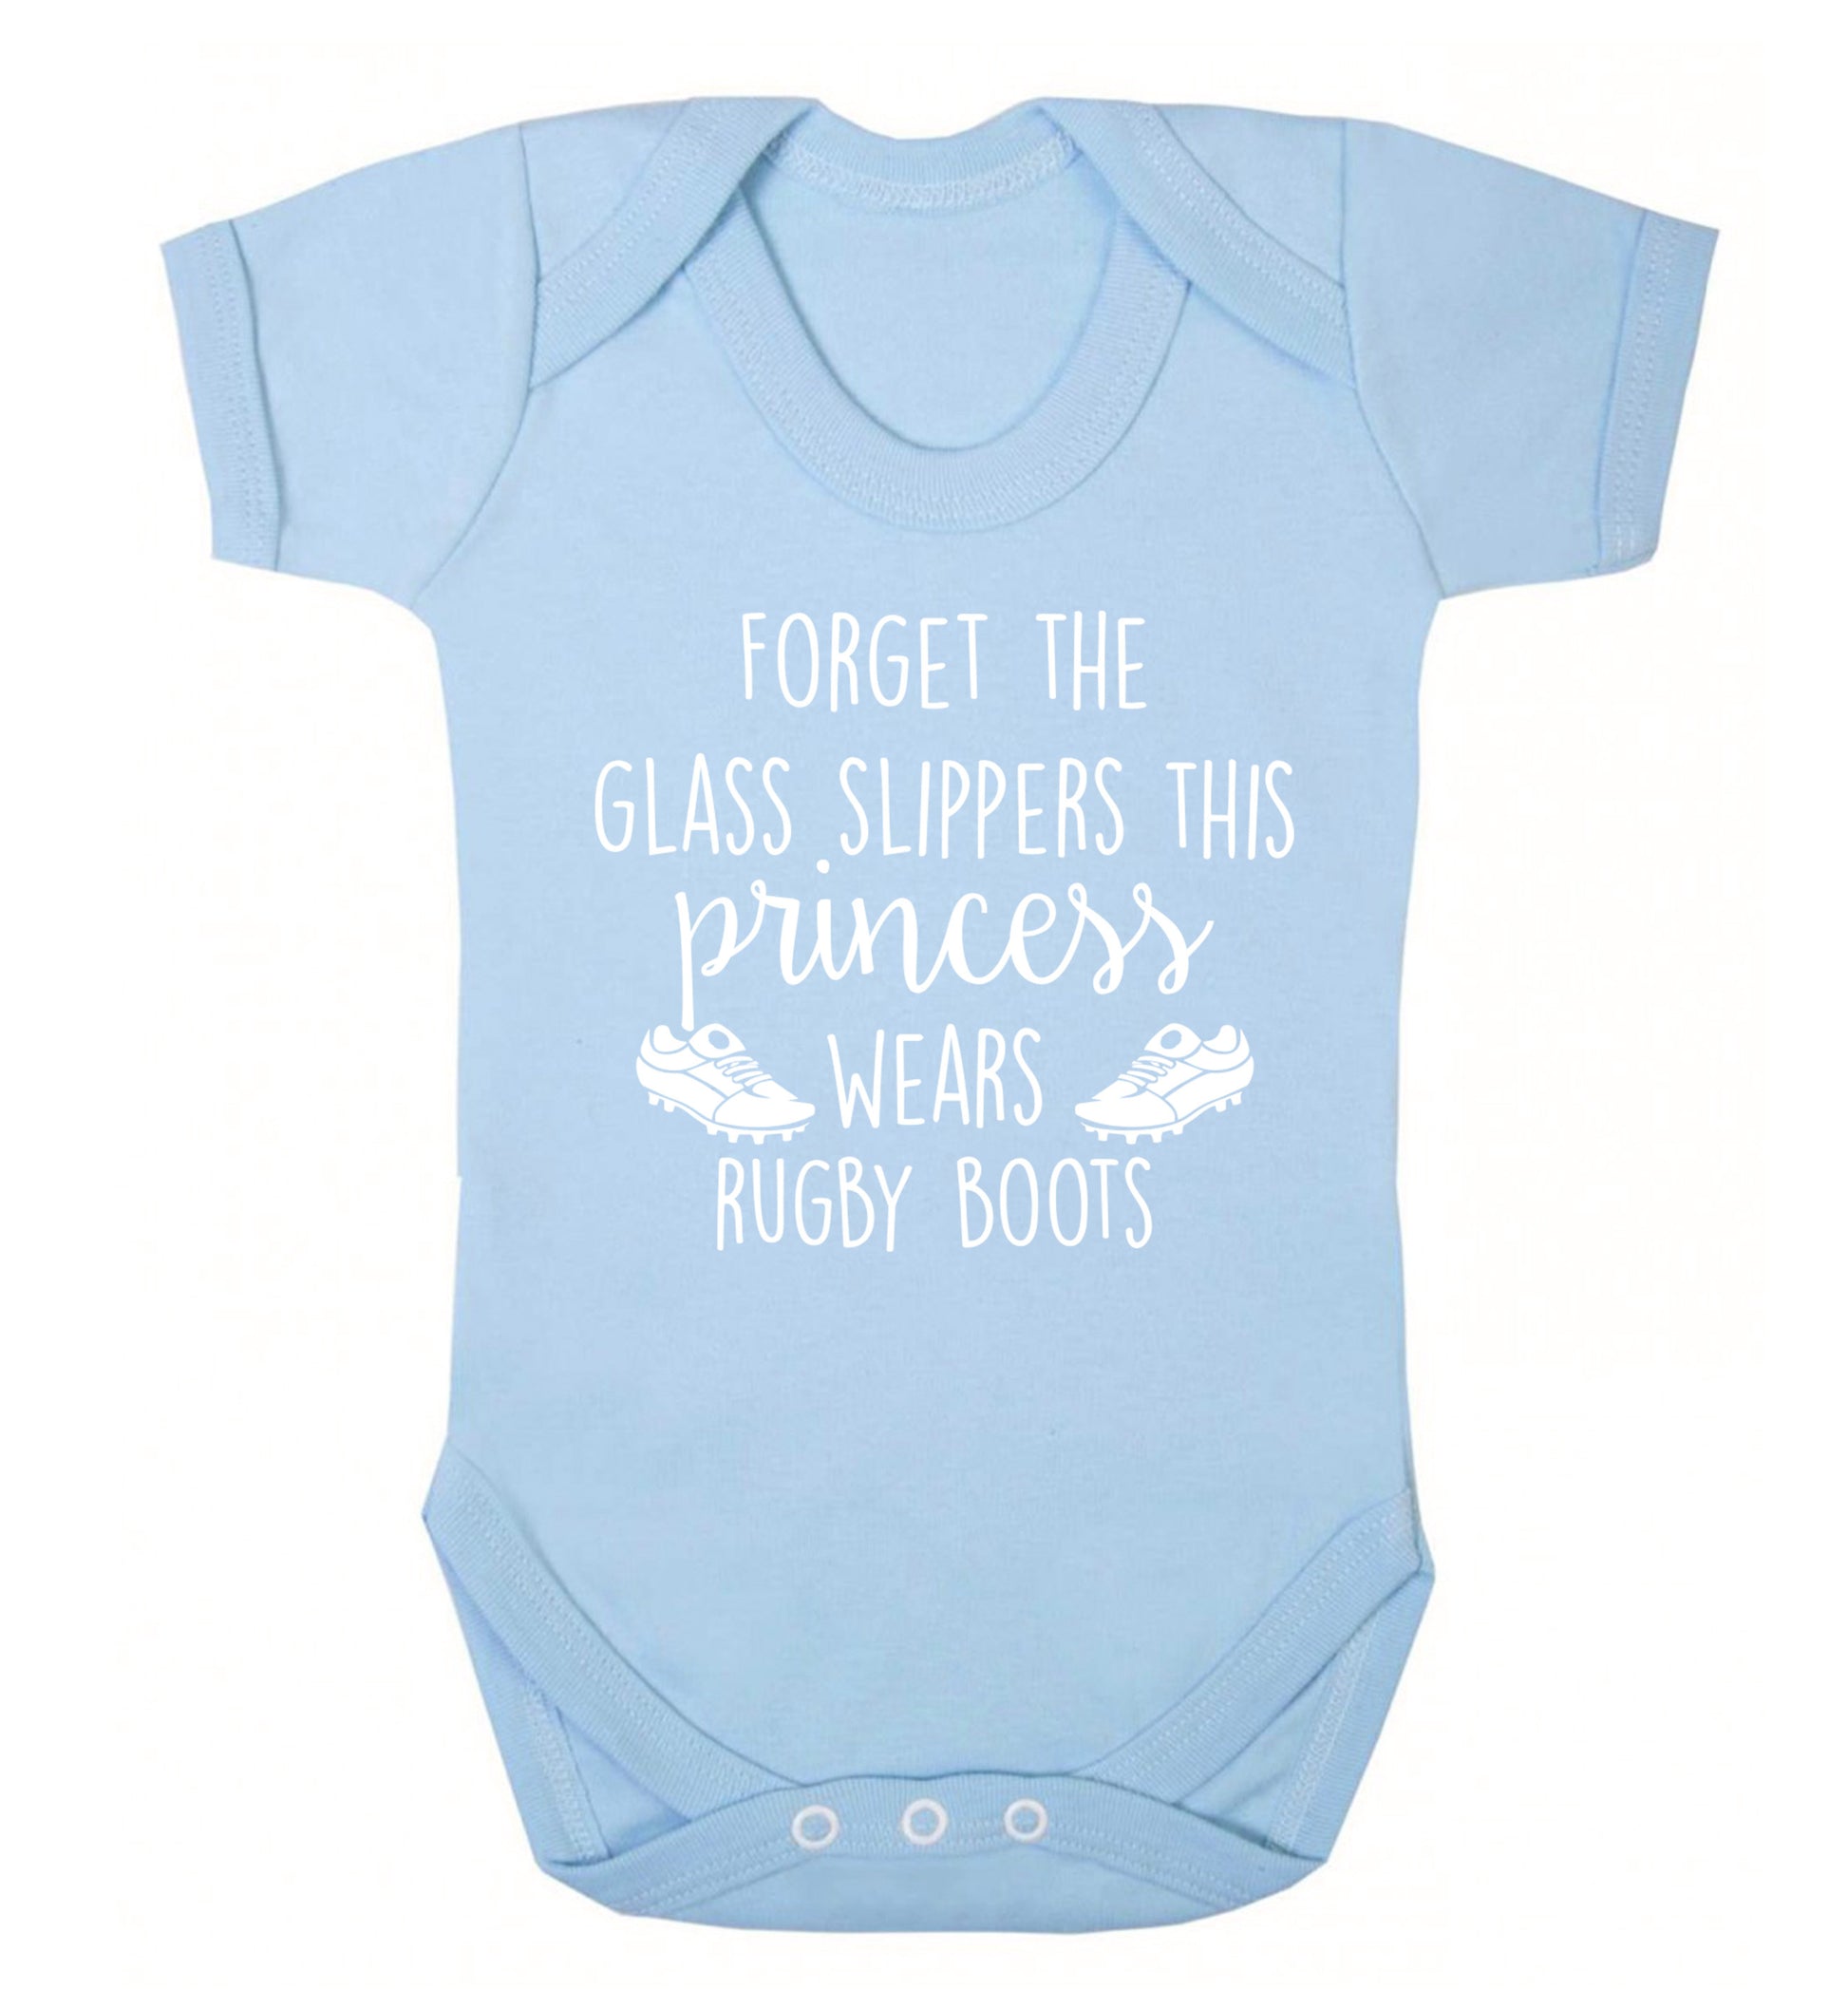 Forget the glass slippers this princess wears rugby boots Baby Vest pale blue 18-24 months